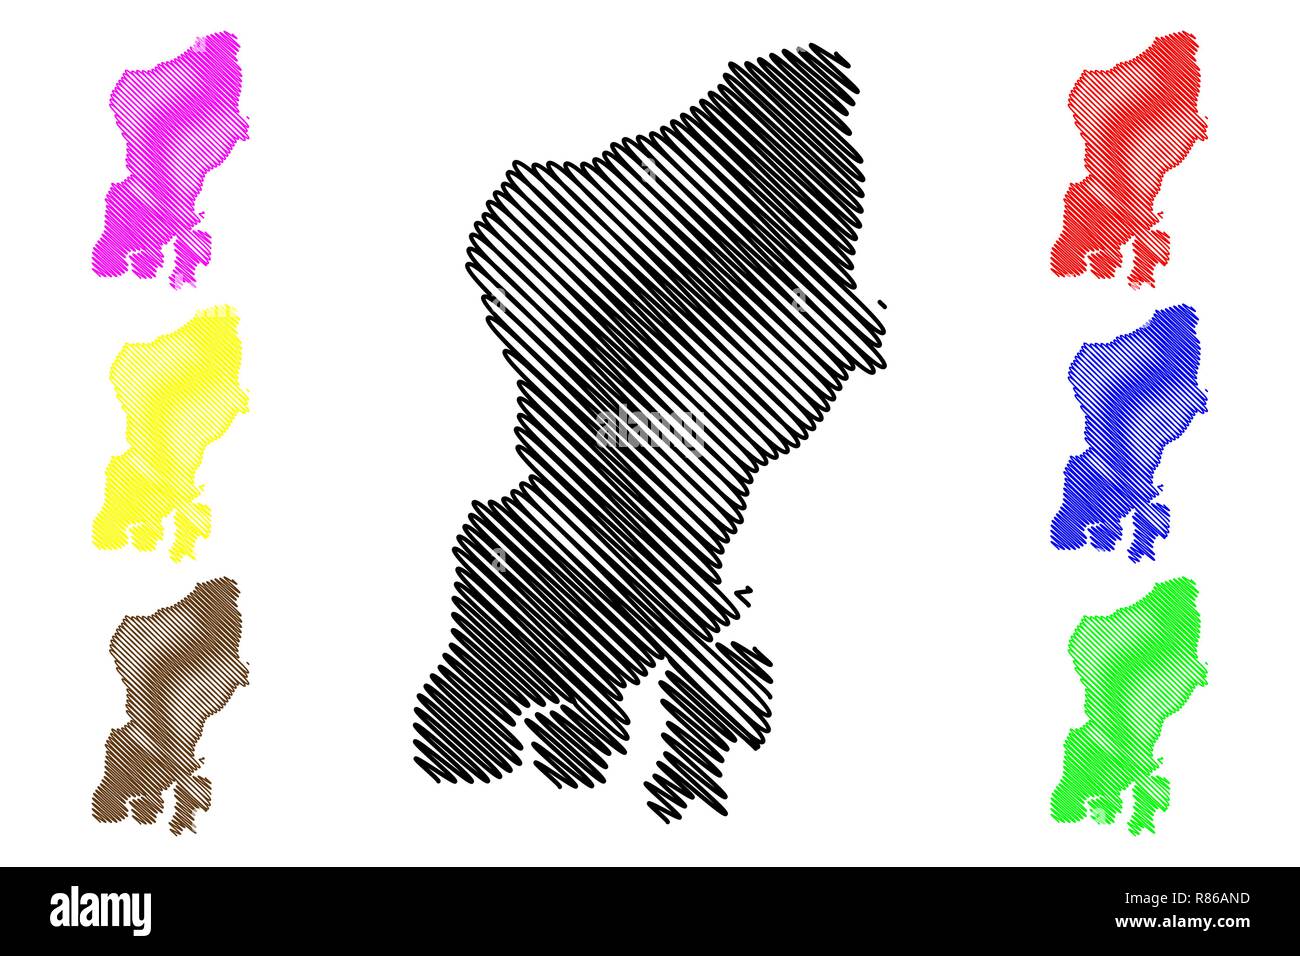 Muna Island (Subdivisions of Indonesia, Provinces of Indonesia) map vector illustration, scribble sketch Muna map Stock Vector